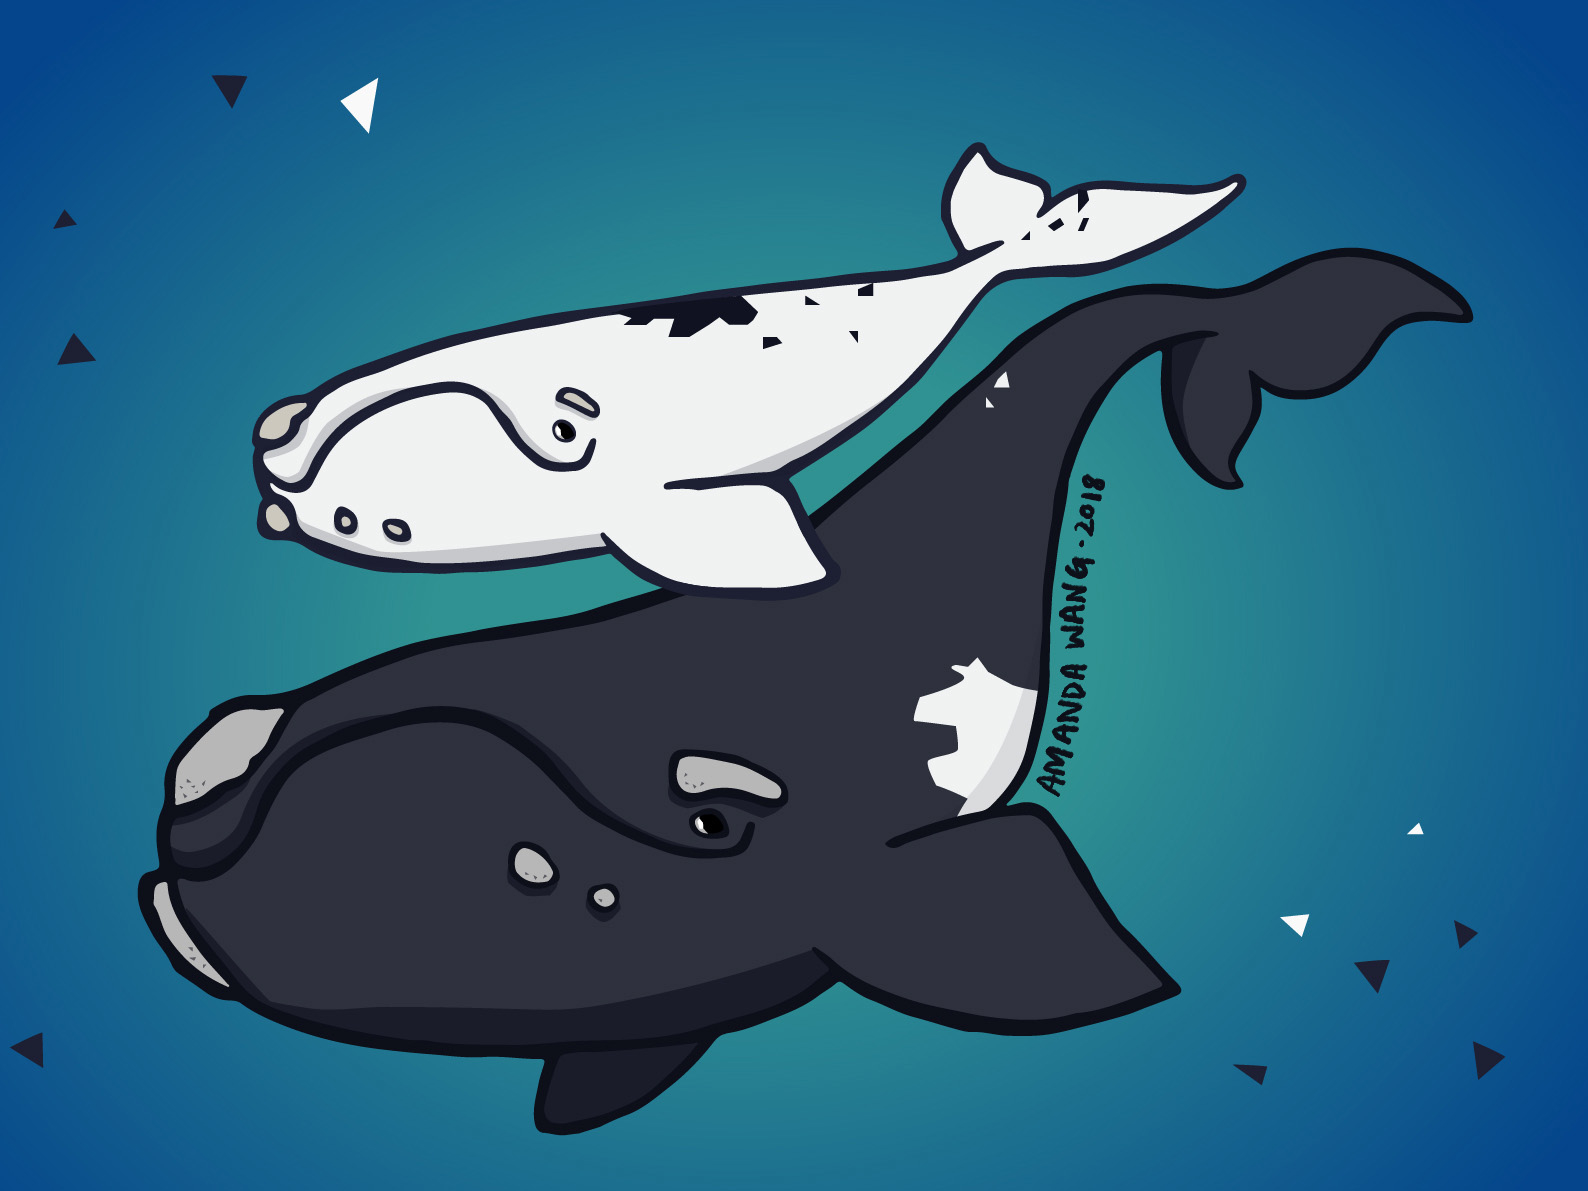 right whale drawing